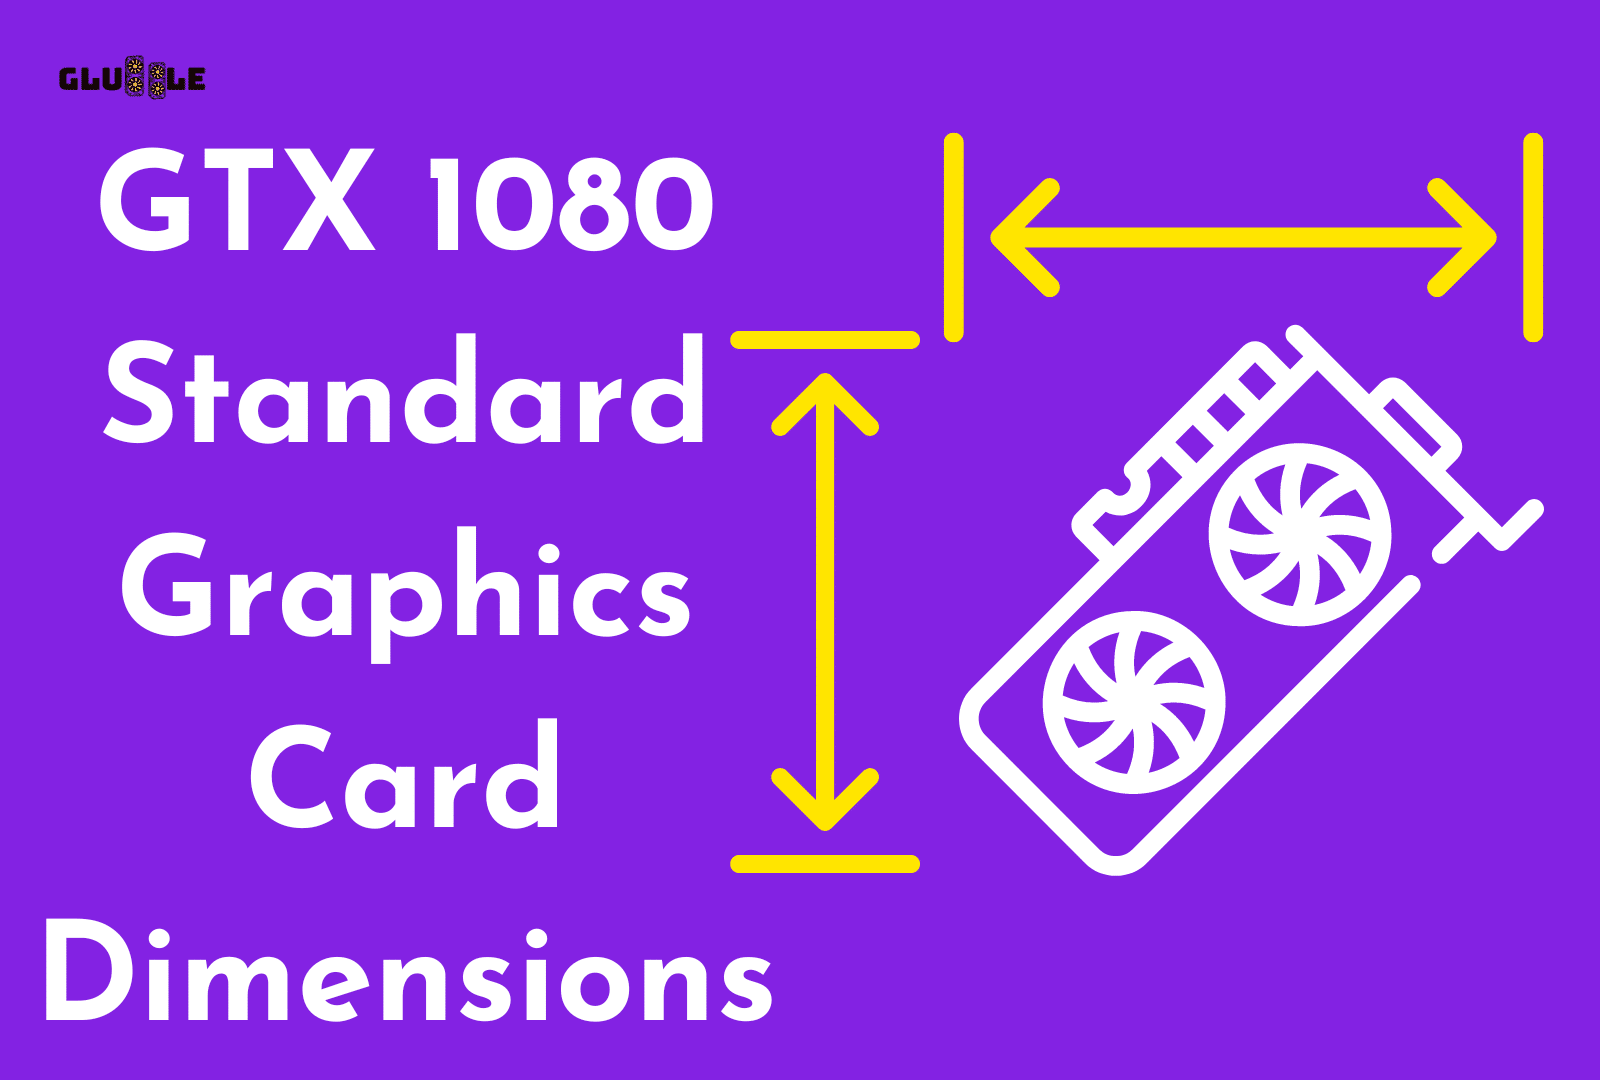 C:\Users\Mohsin\Downloads\GTX 1080 Standard Graphics Card Dimensions.png